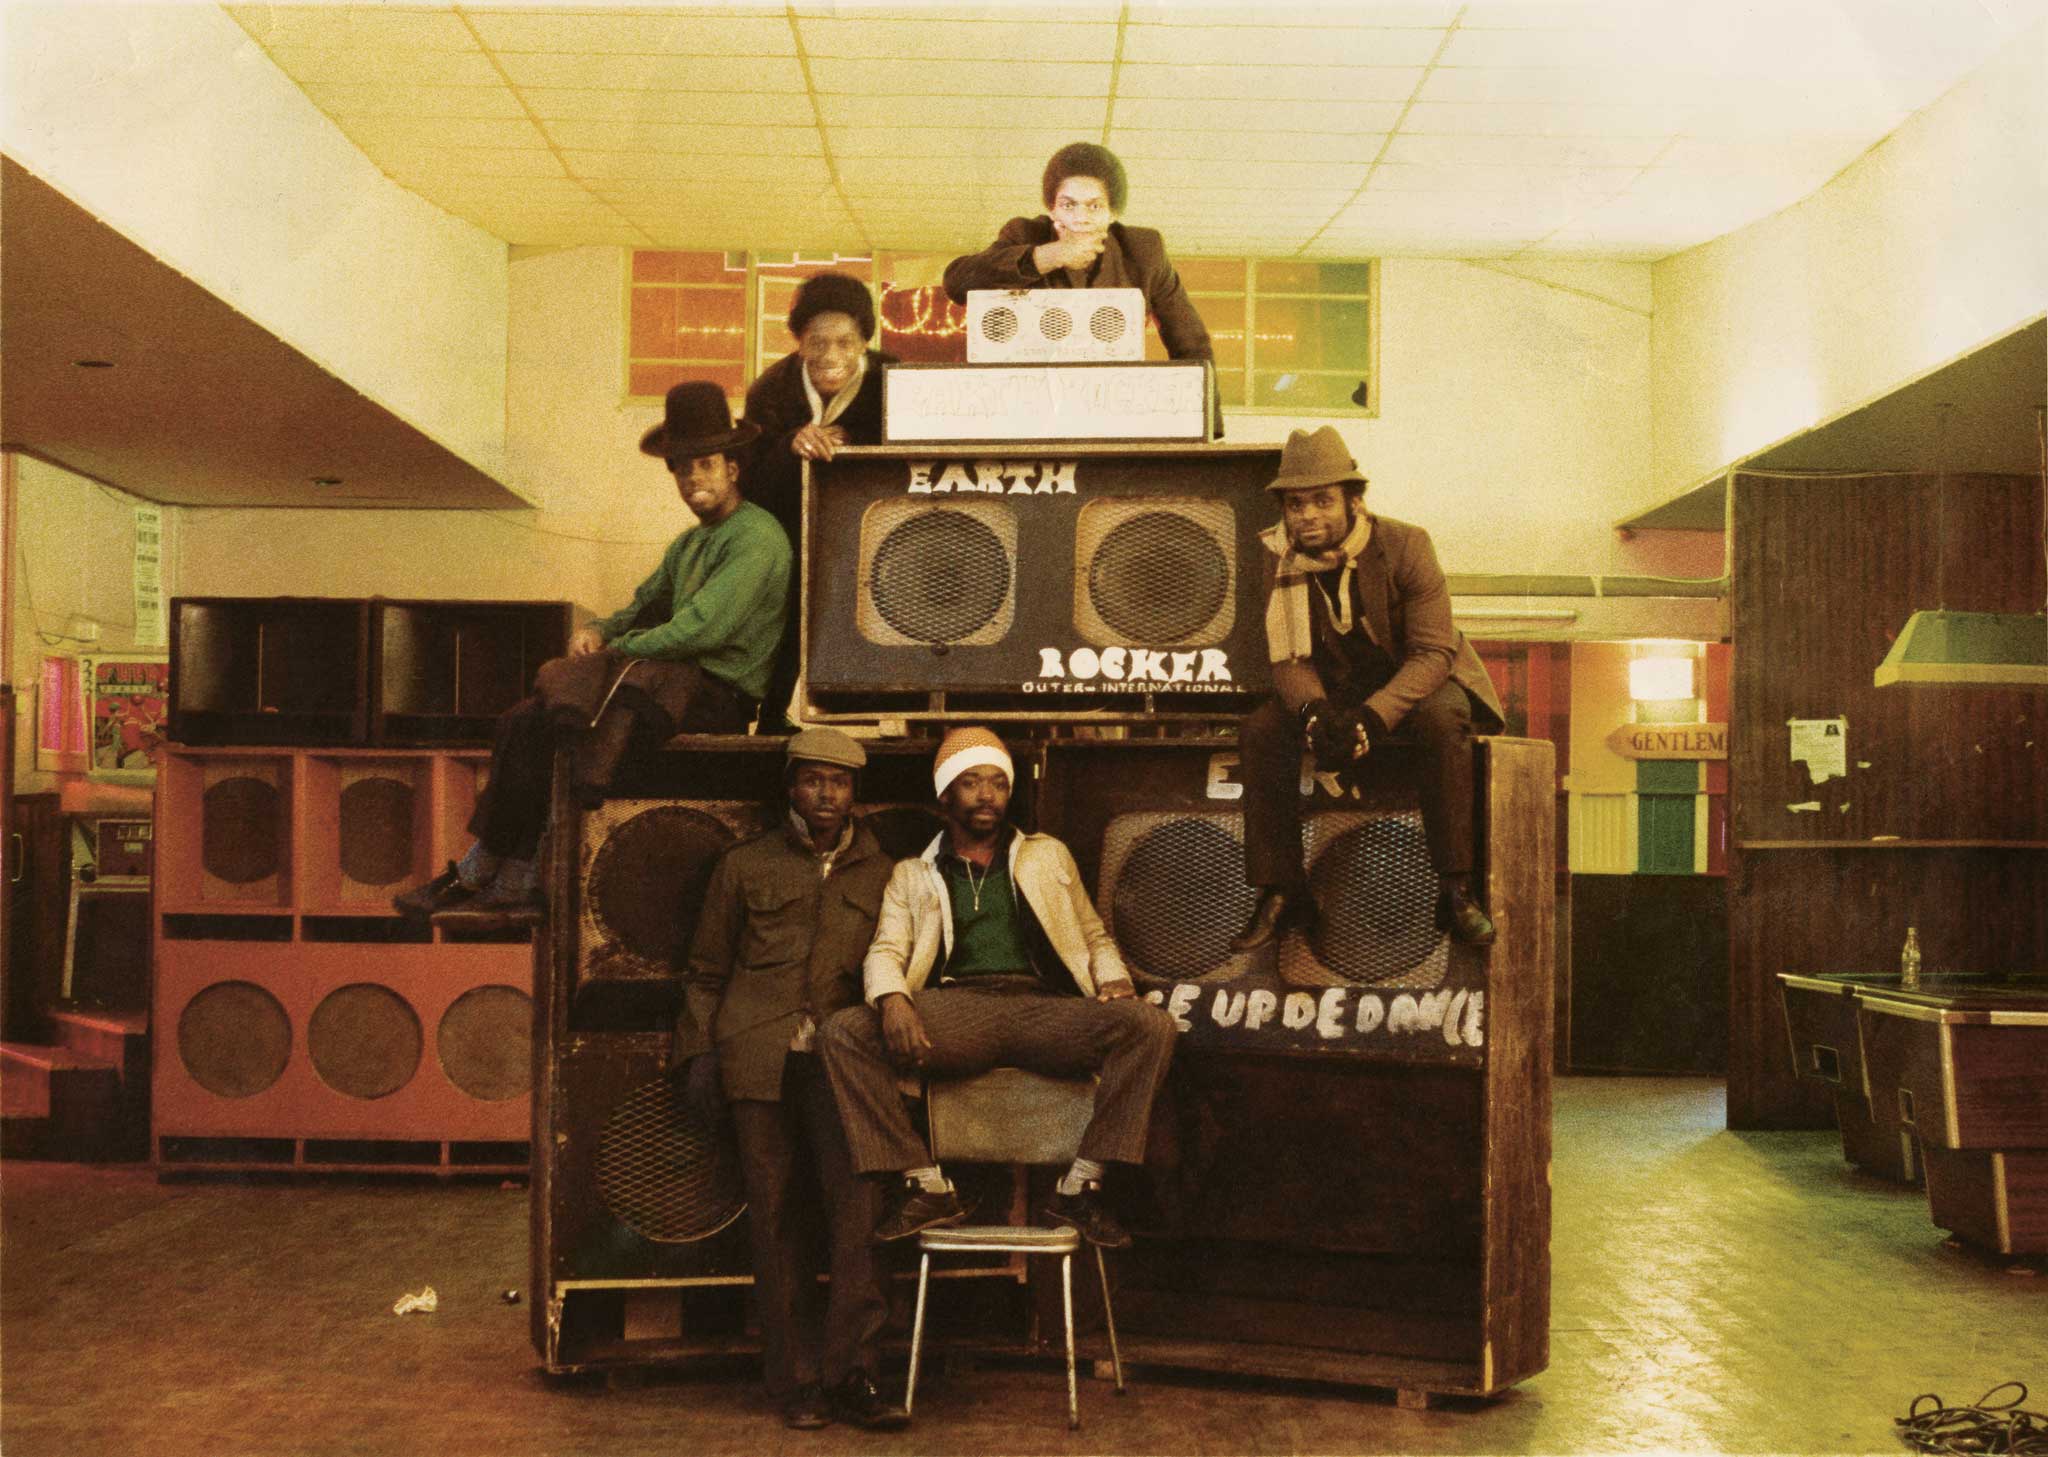 Sound clash: the Earth Rocker sound system crew at work in Venn Street in the late 1970s